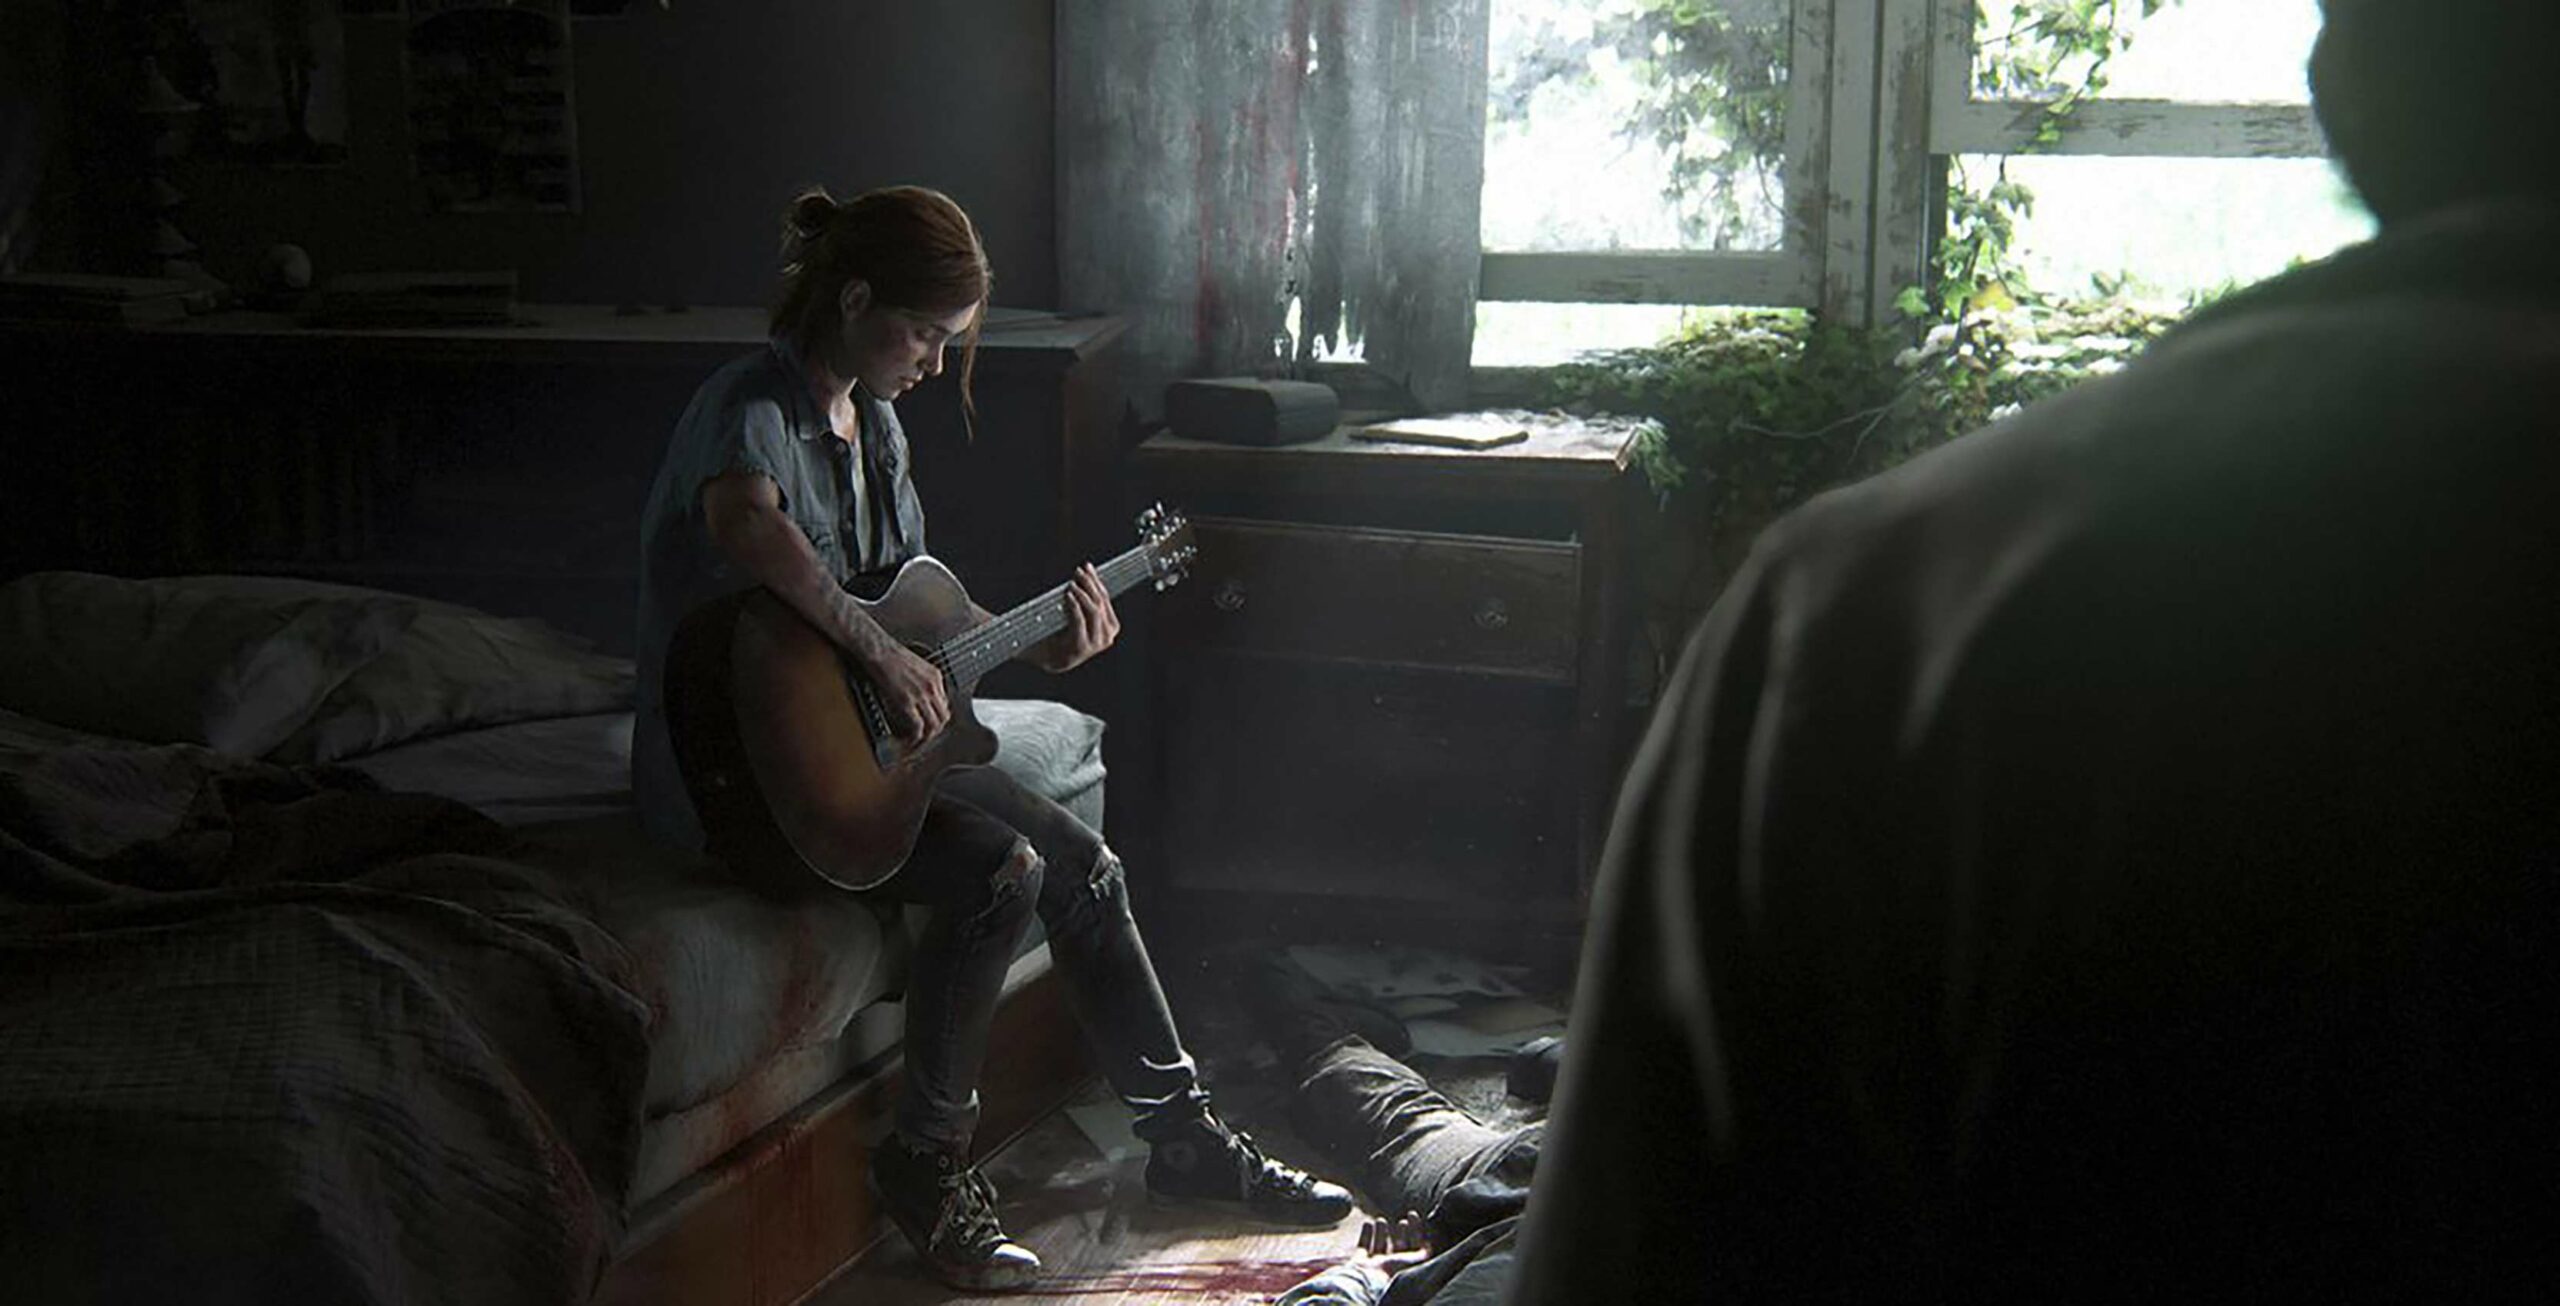 The Last of Us Part II takes home 'Game of the Year' at The Game Awards